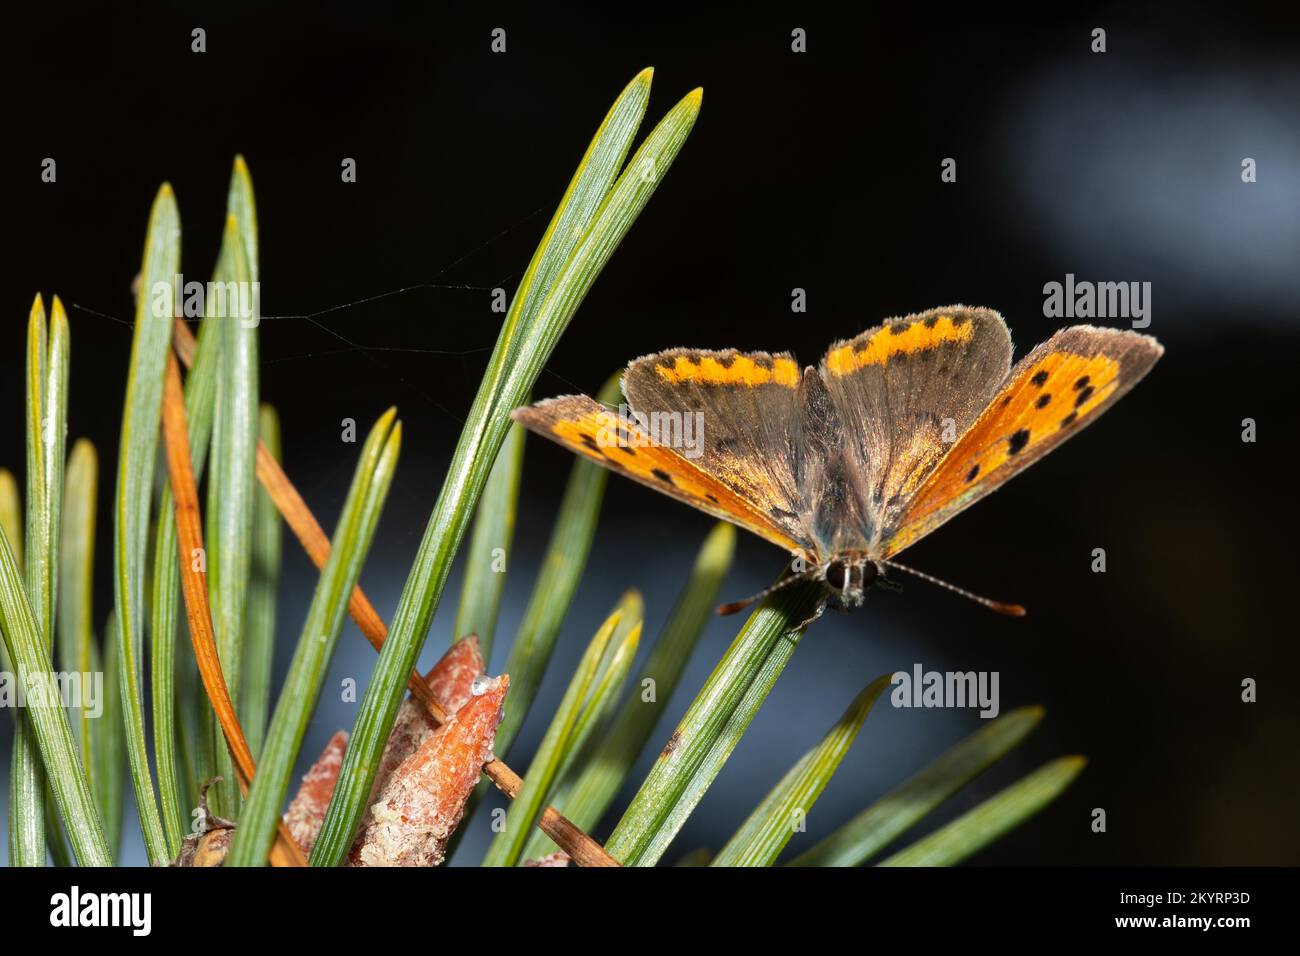 Small fire butterfly butterfly with open wings sitting on pine needle from the front Stock Photo